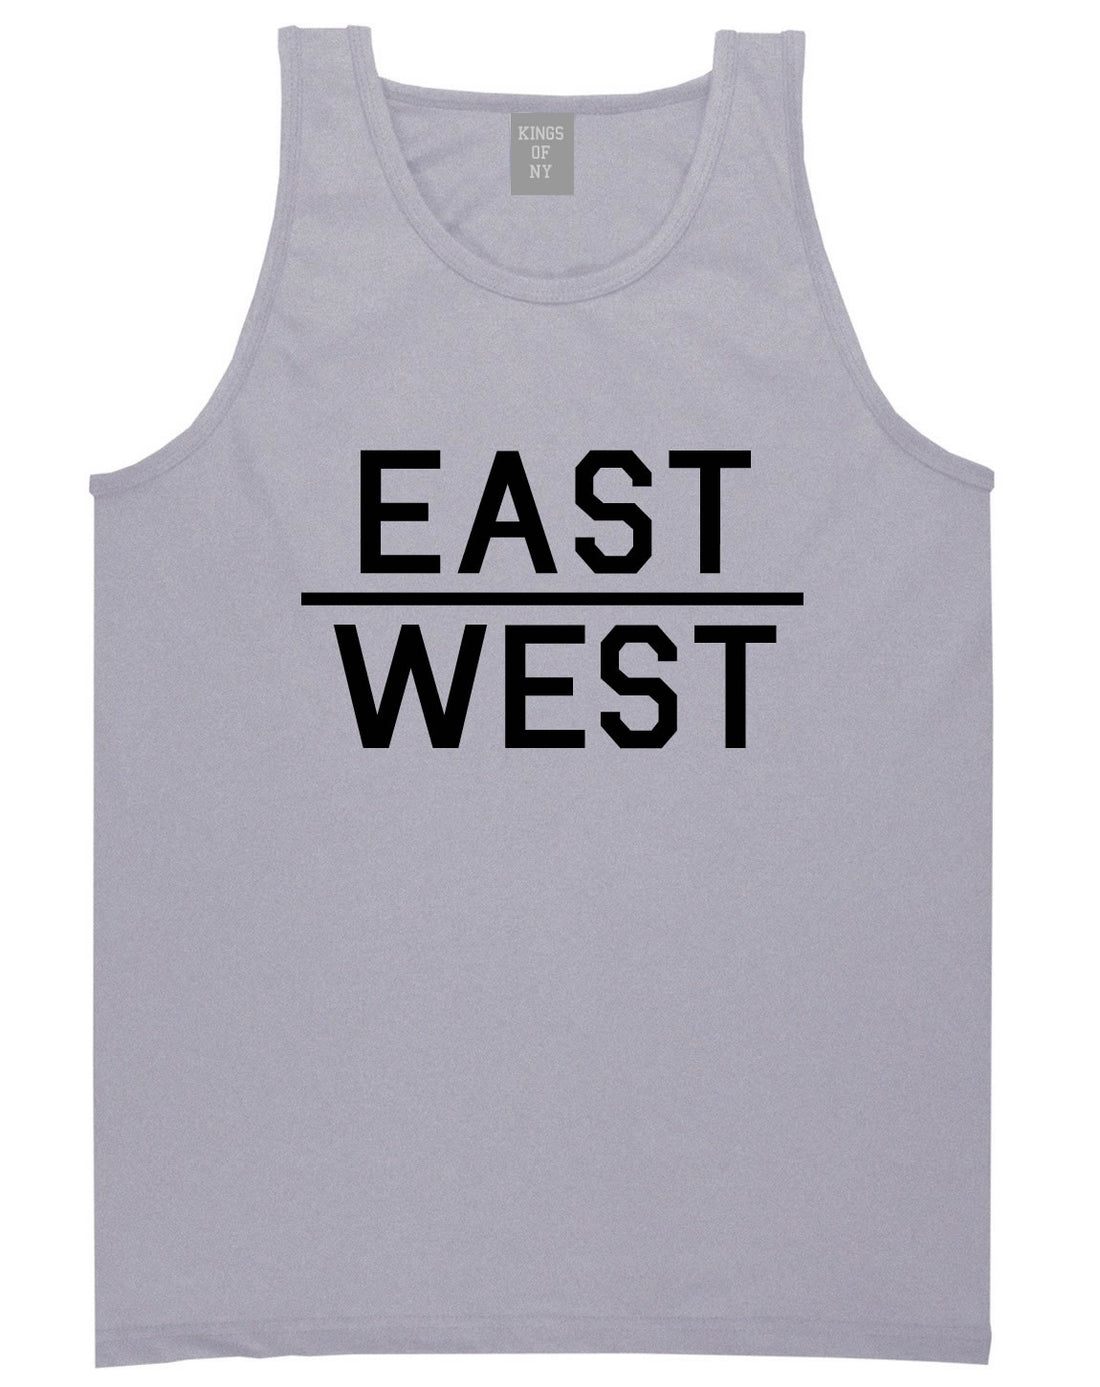 East West Tank Top in Grey by Kings Of NY